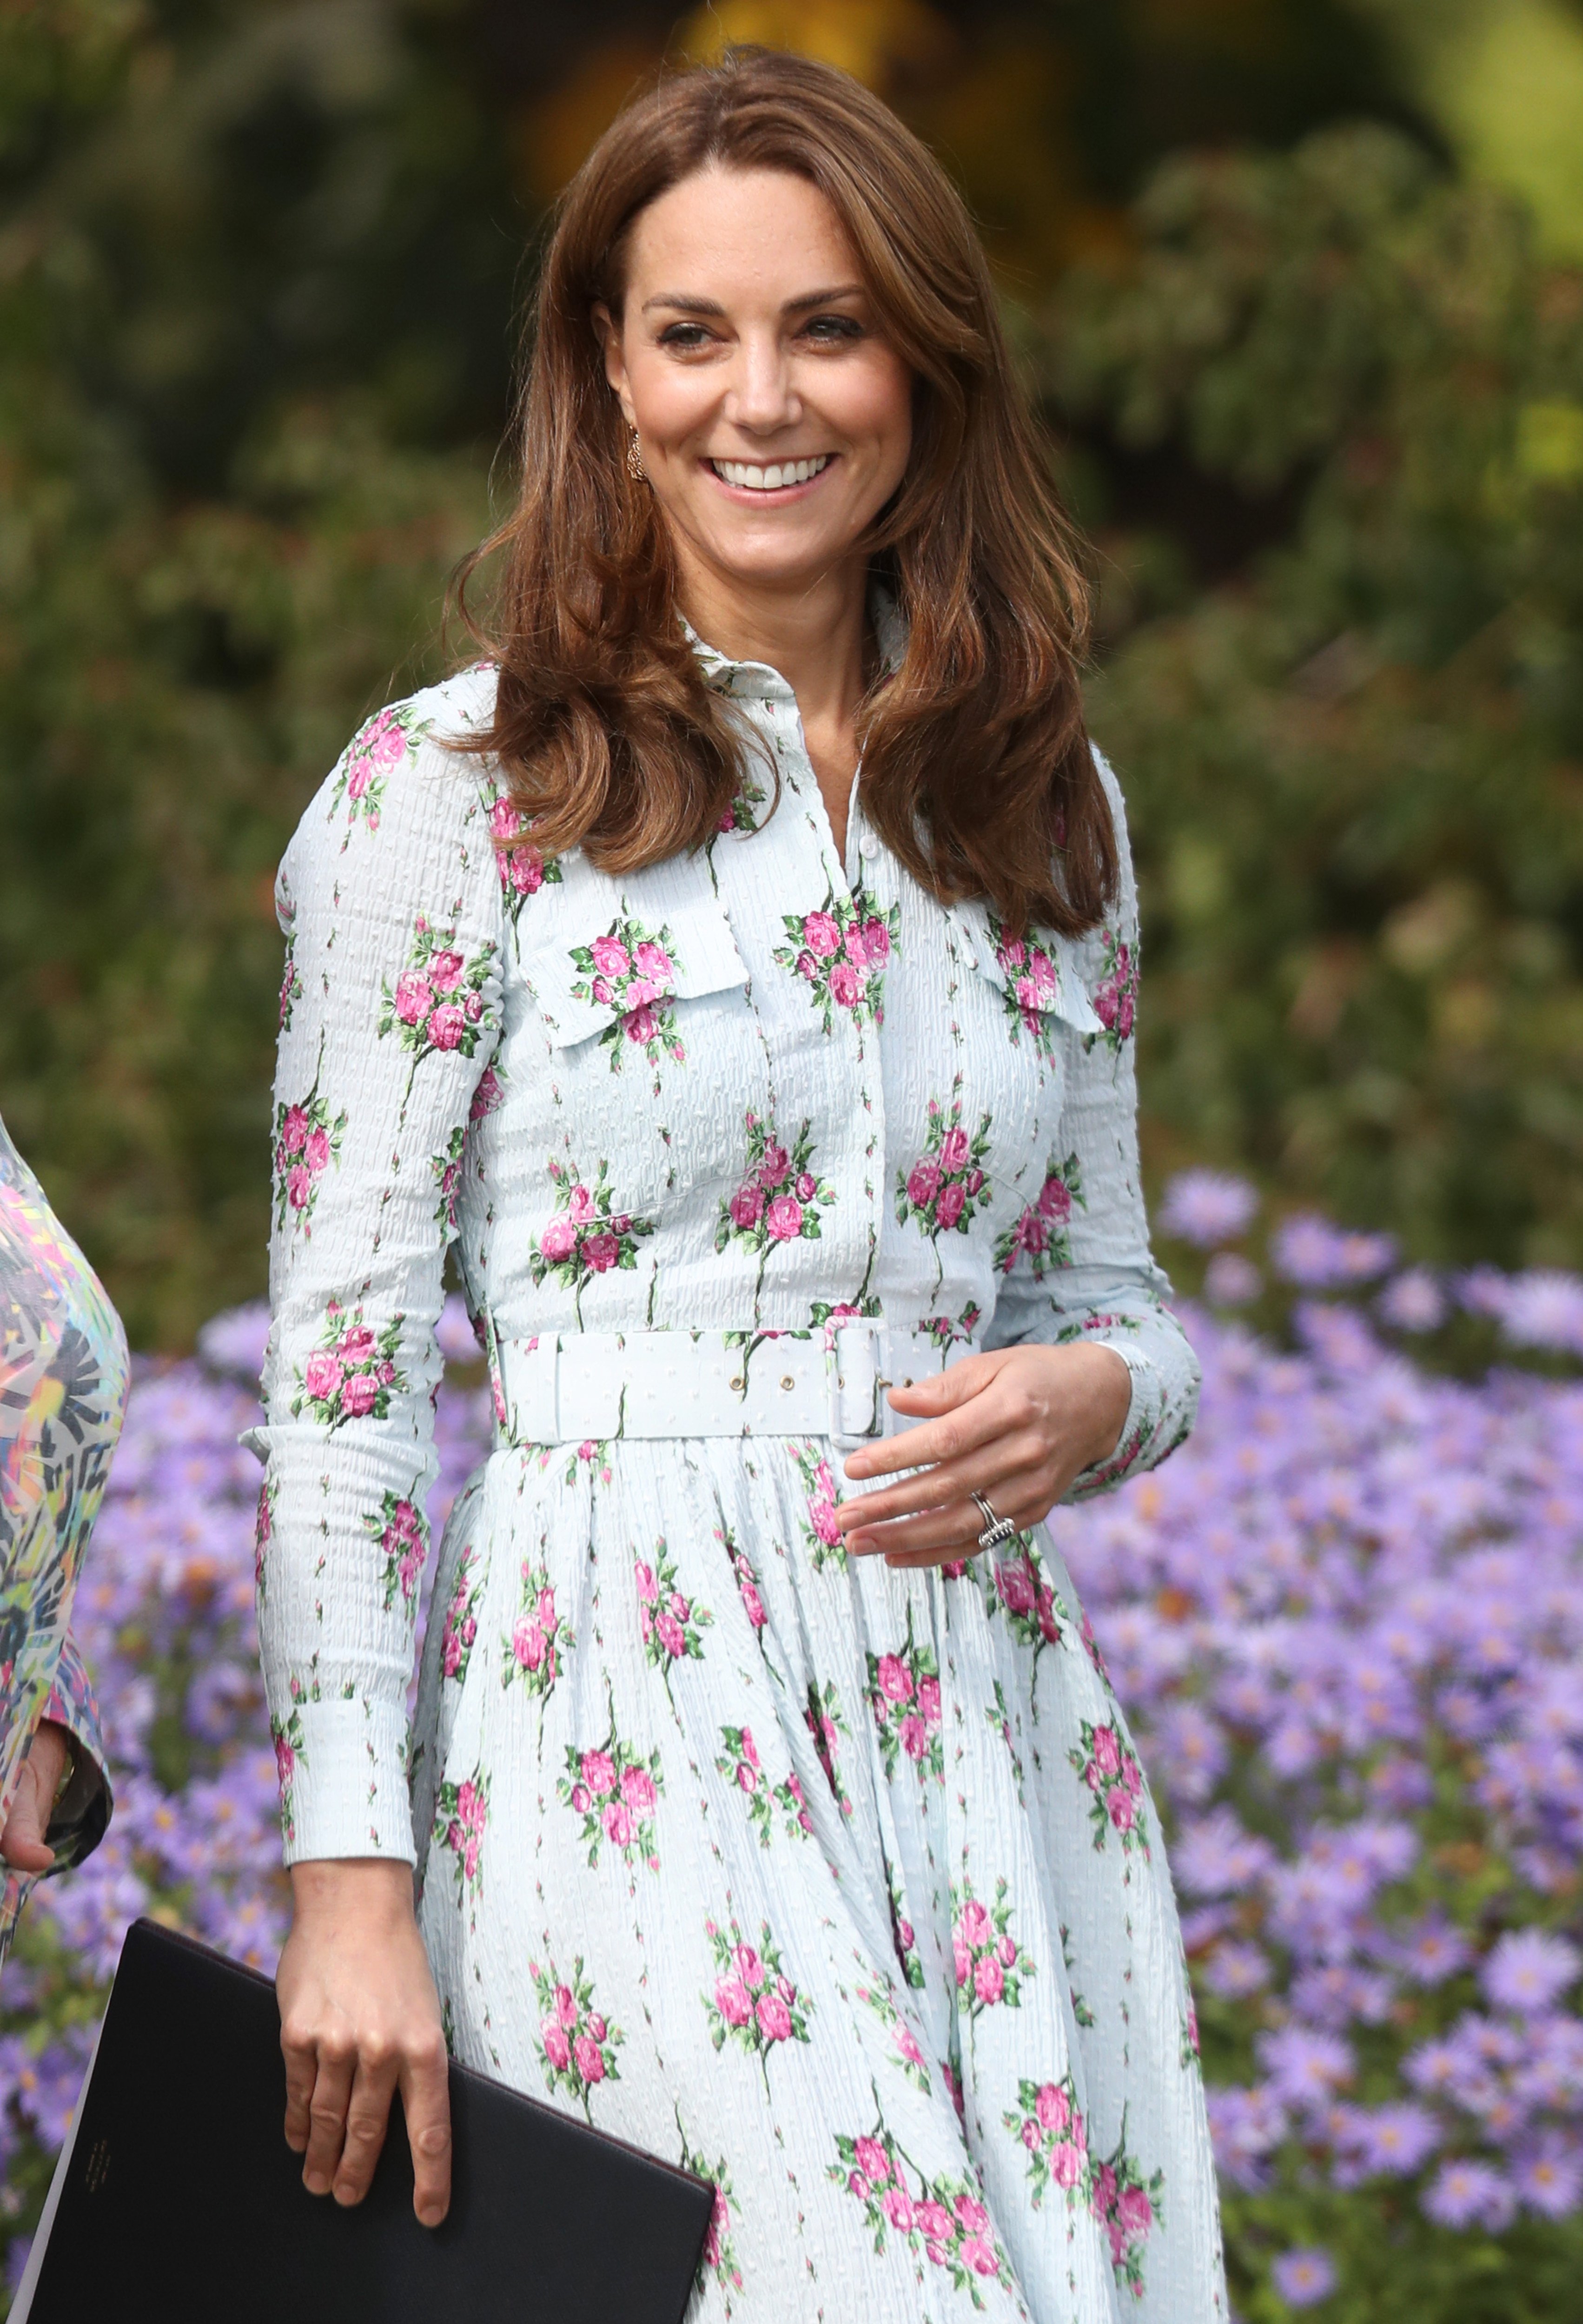 Duchess Kate at the "Back to Nature" festival at RHS Garden Wisley on September 10, 2019, in Woking, England | Photo: Getty Images